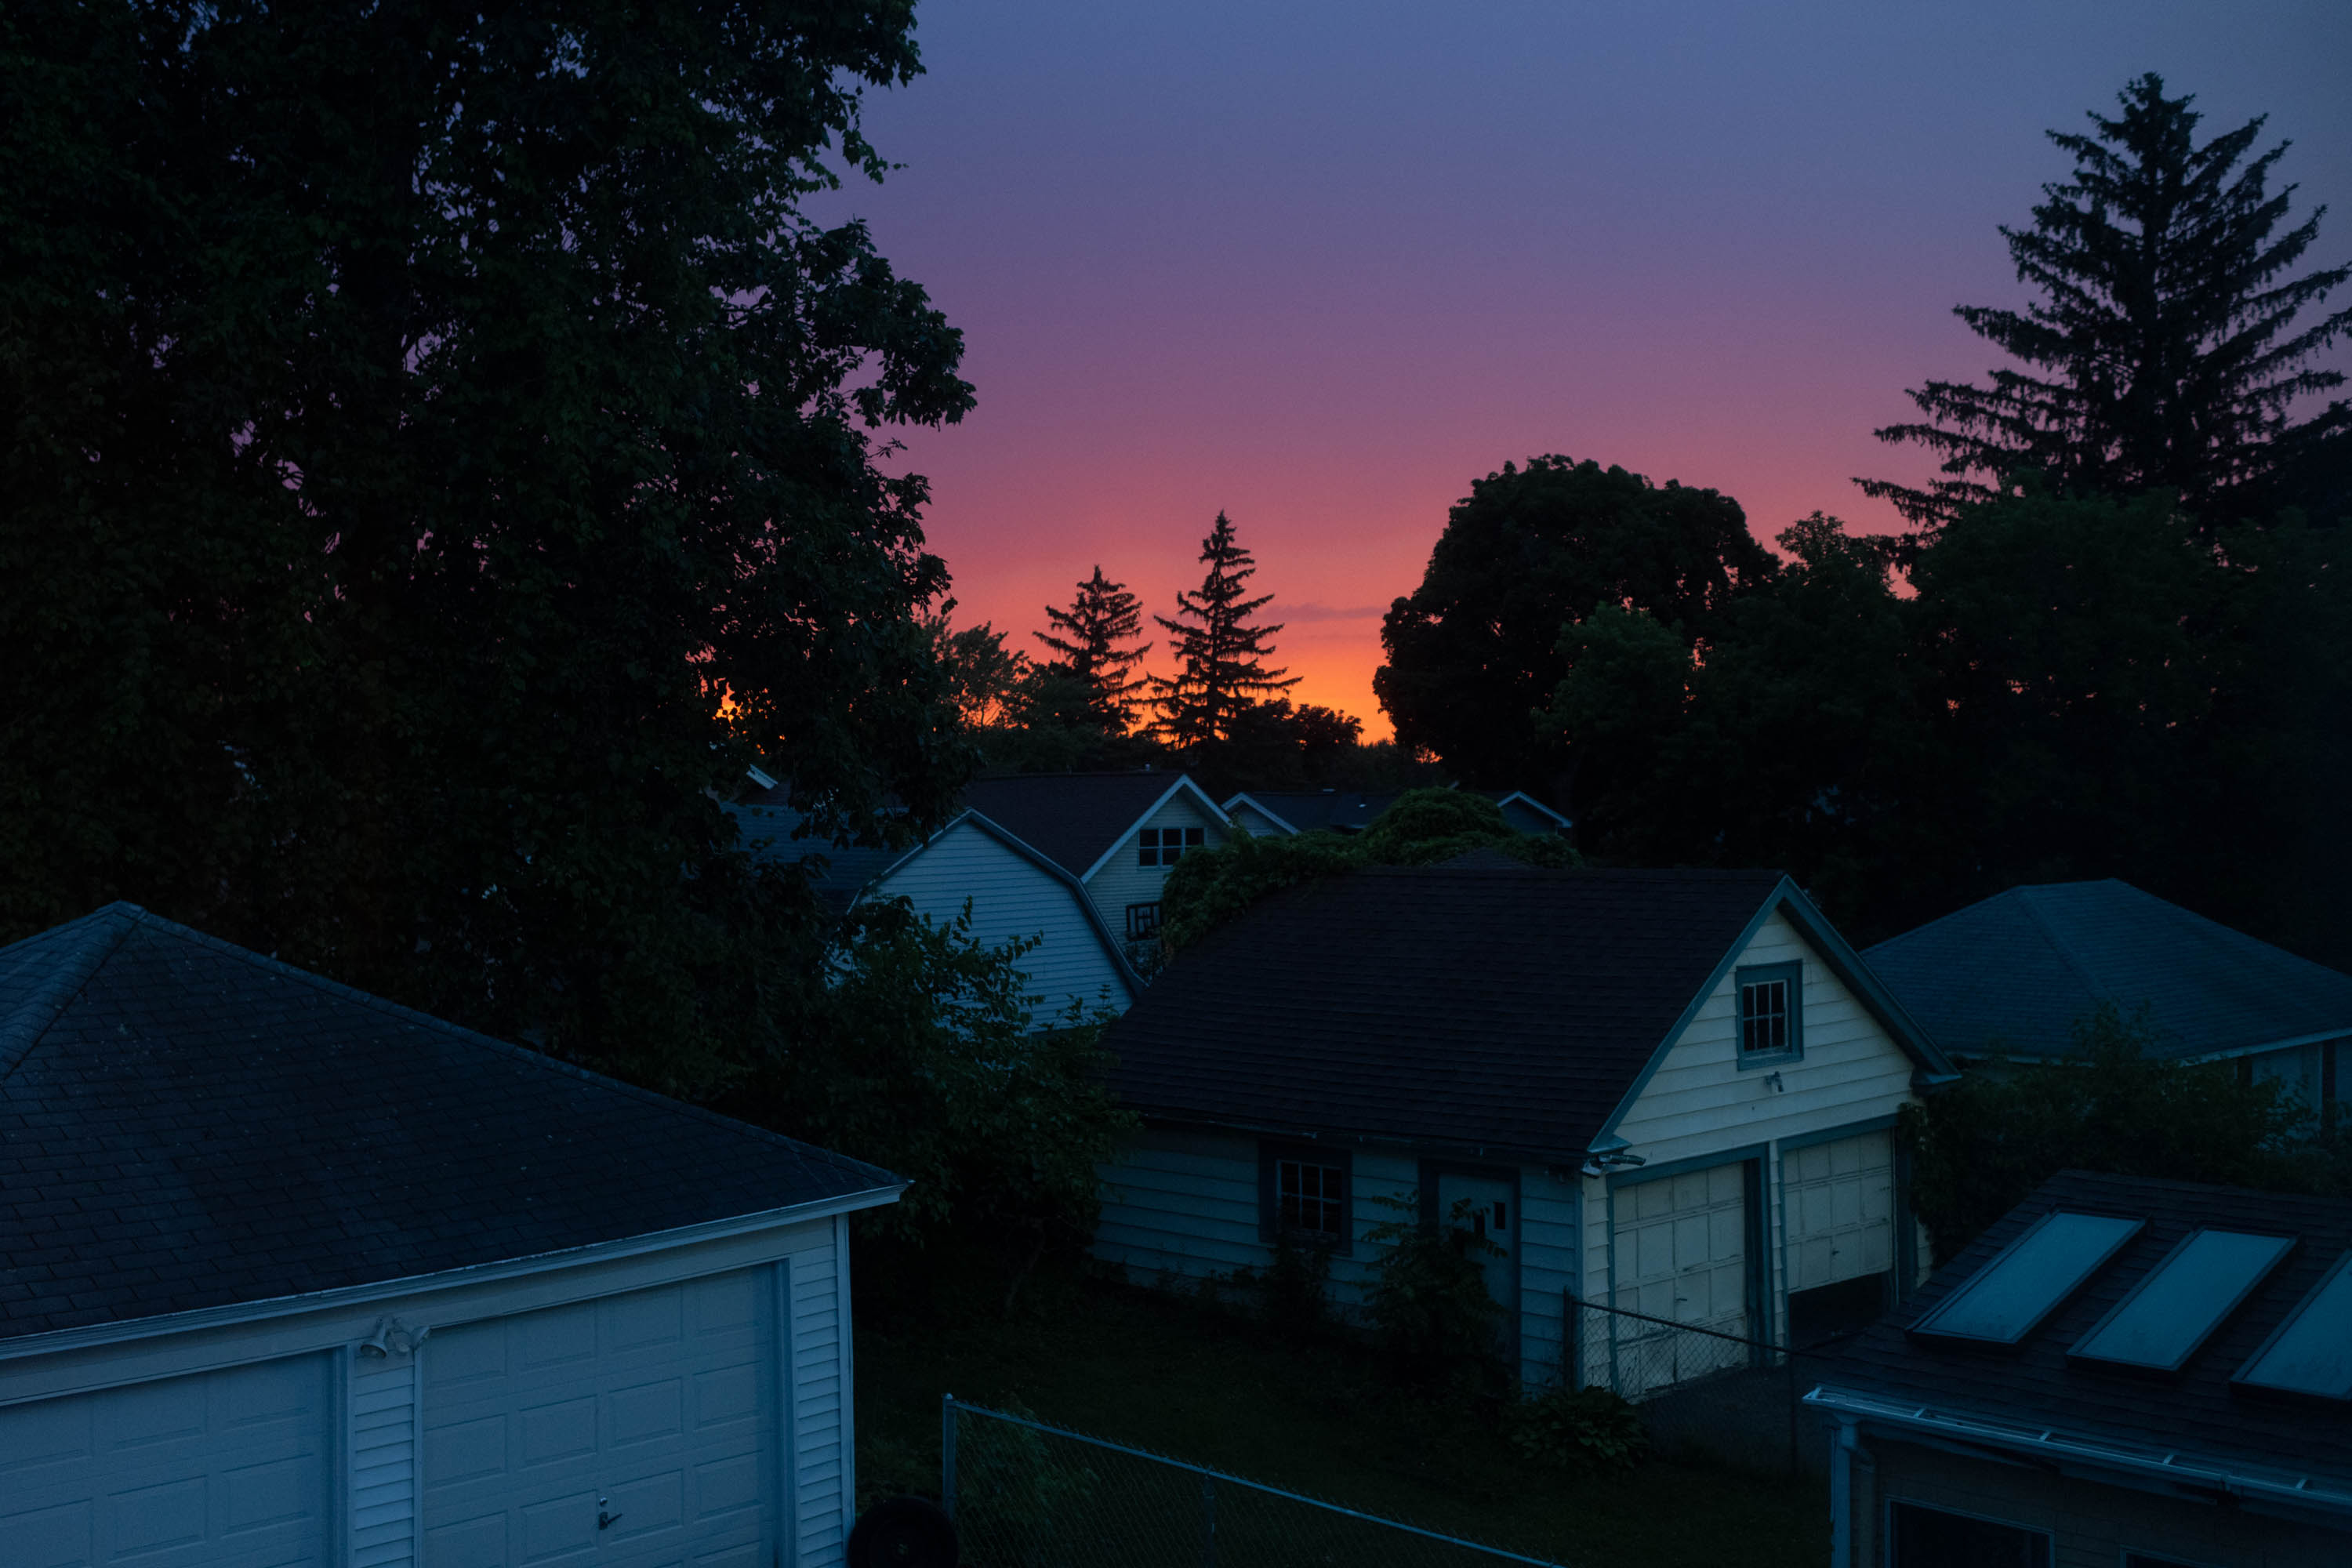 A vibrant orange, pink and blue sunset is shown over a suburban neighborhood in Syracuse, New York.